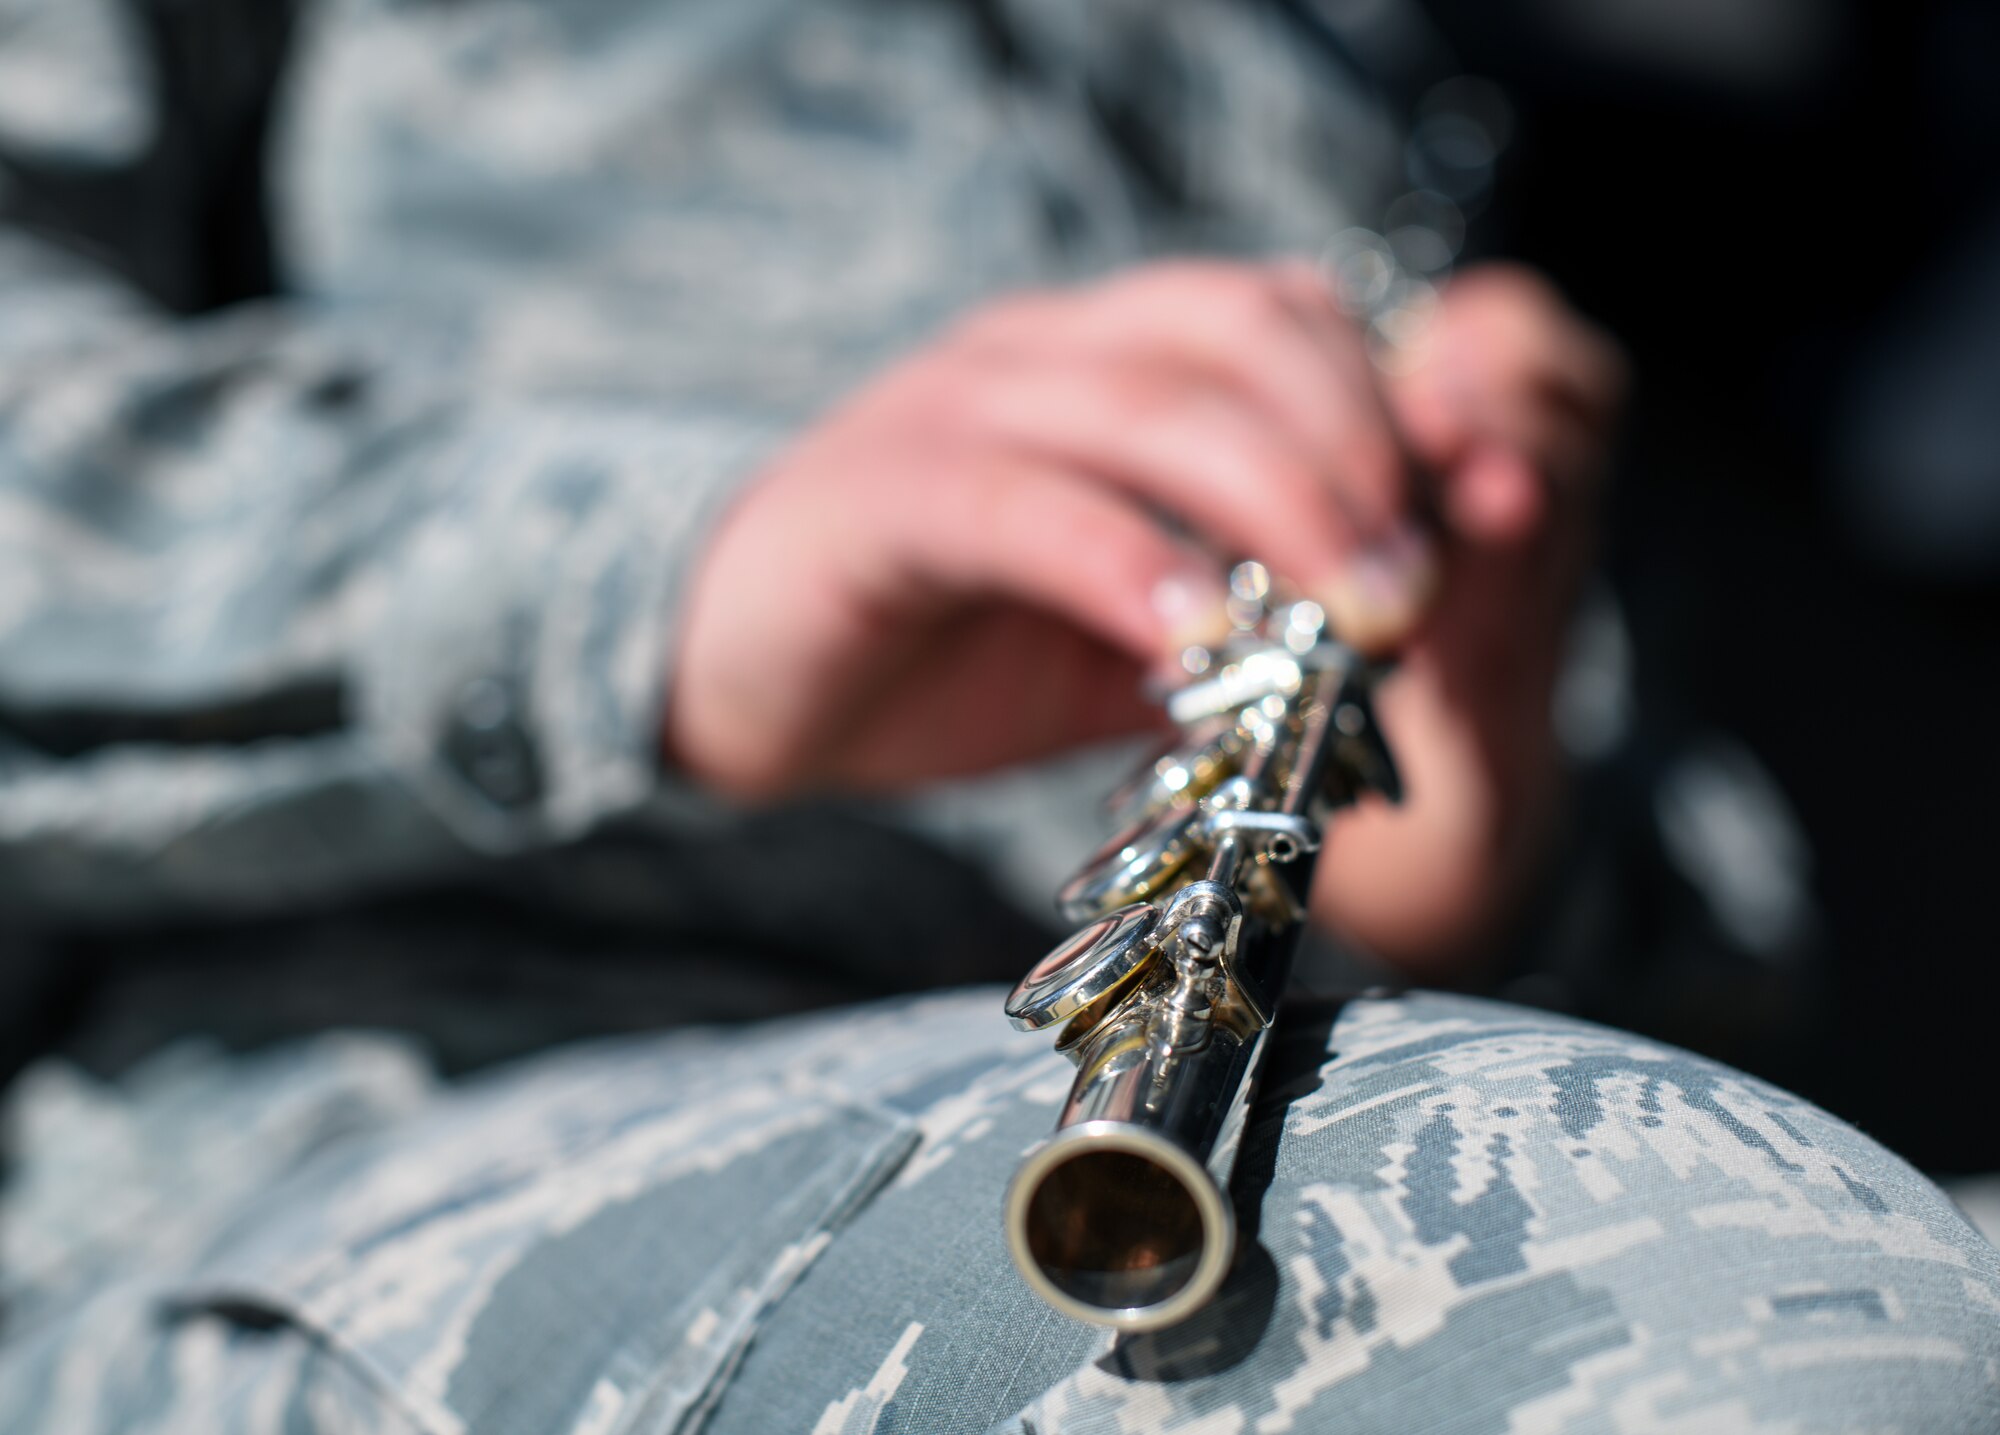 Senior Airman Richard Elefson, an 11th Space Warning Squadron mission management operator, holds his flute, Jan. 10, 2020, at the chapel on Buckley Air Force Base, Colo.